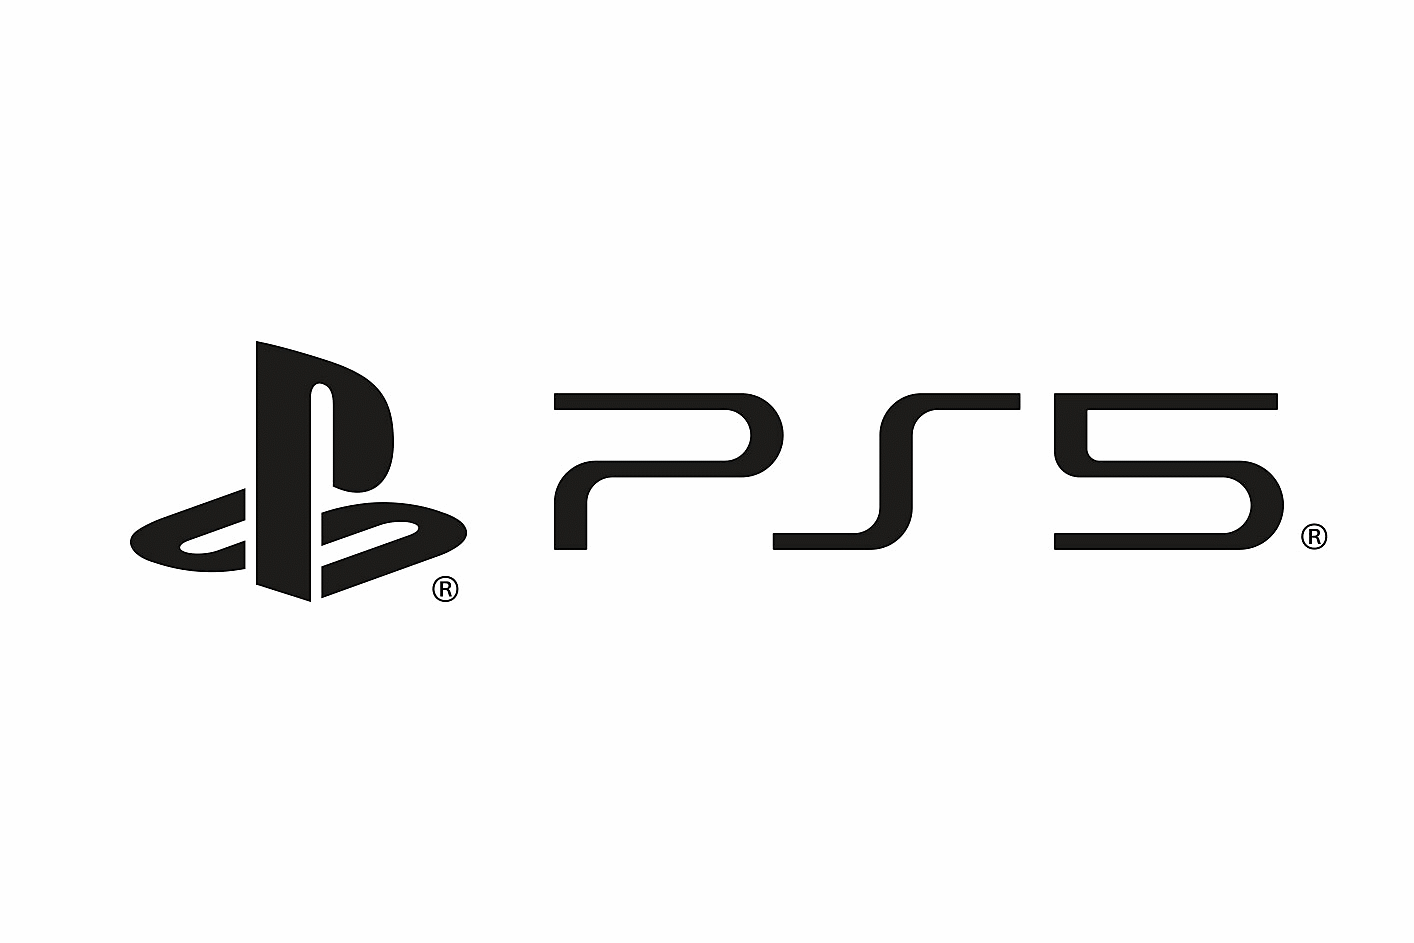 Logoet for Sony PS5